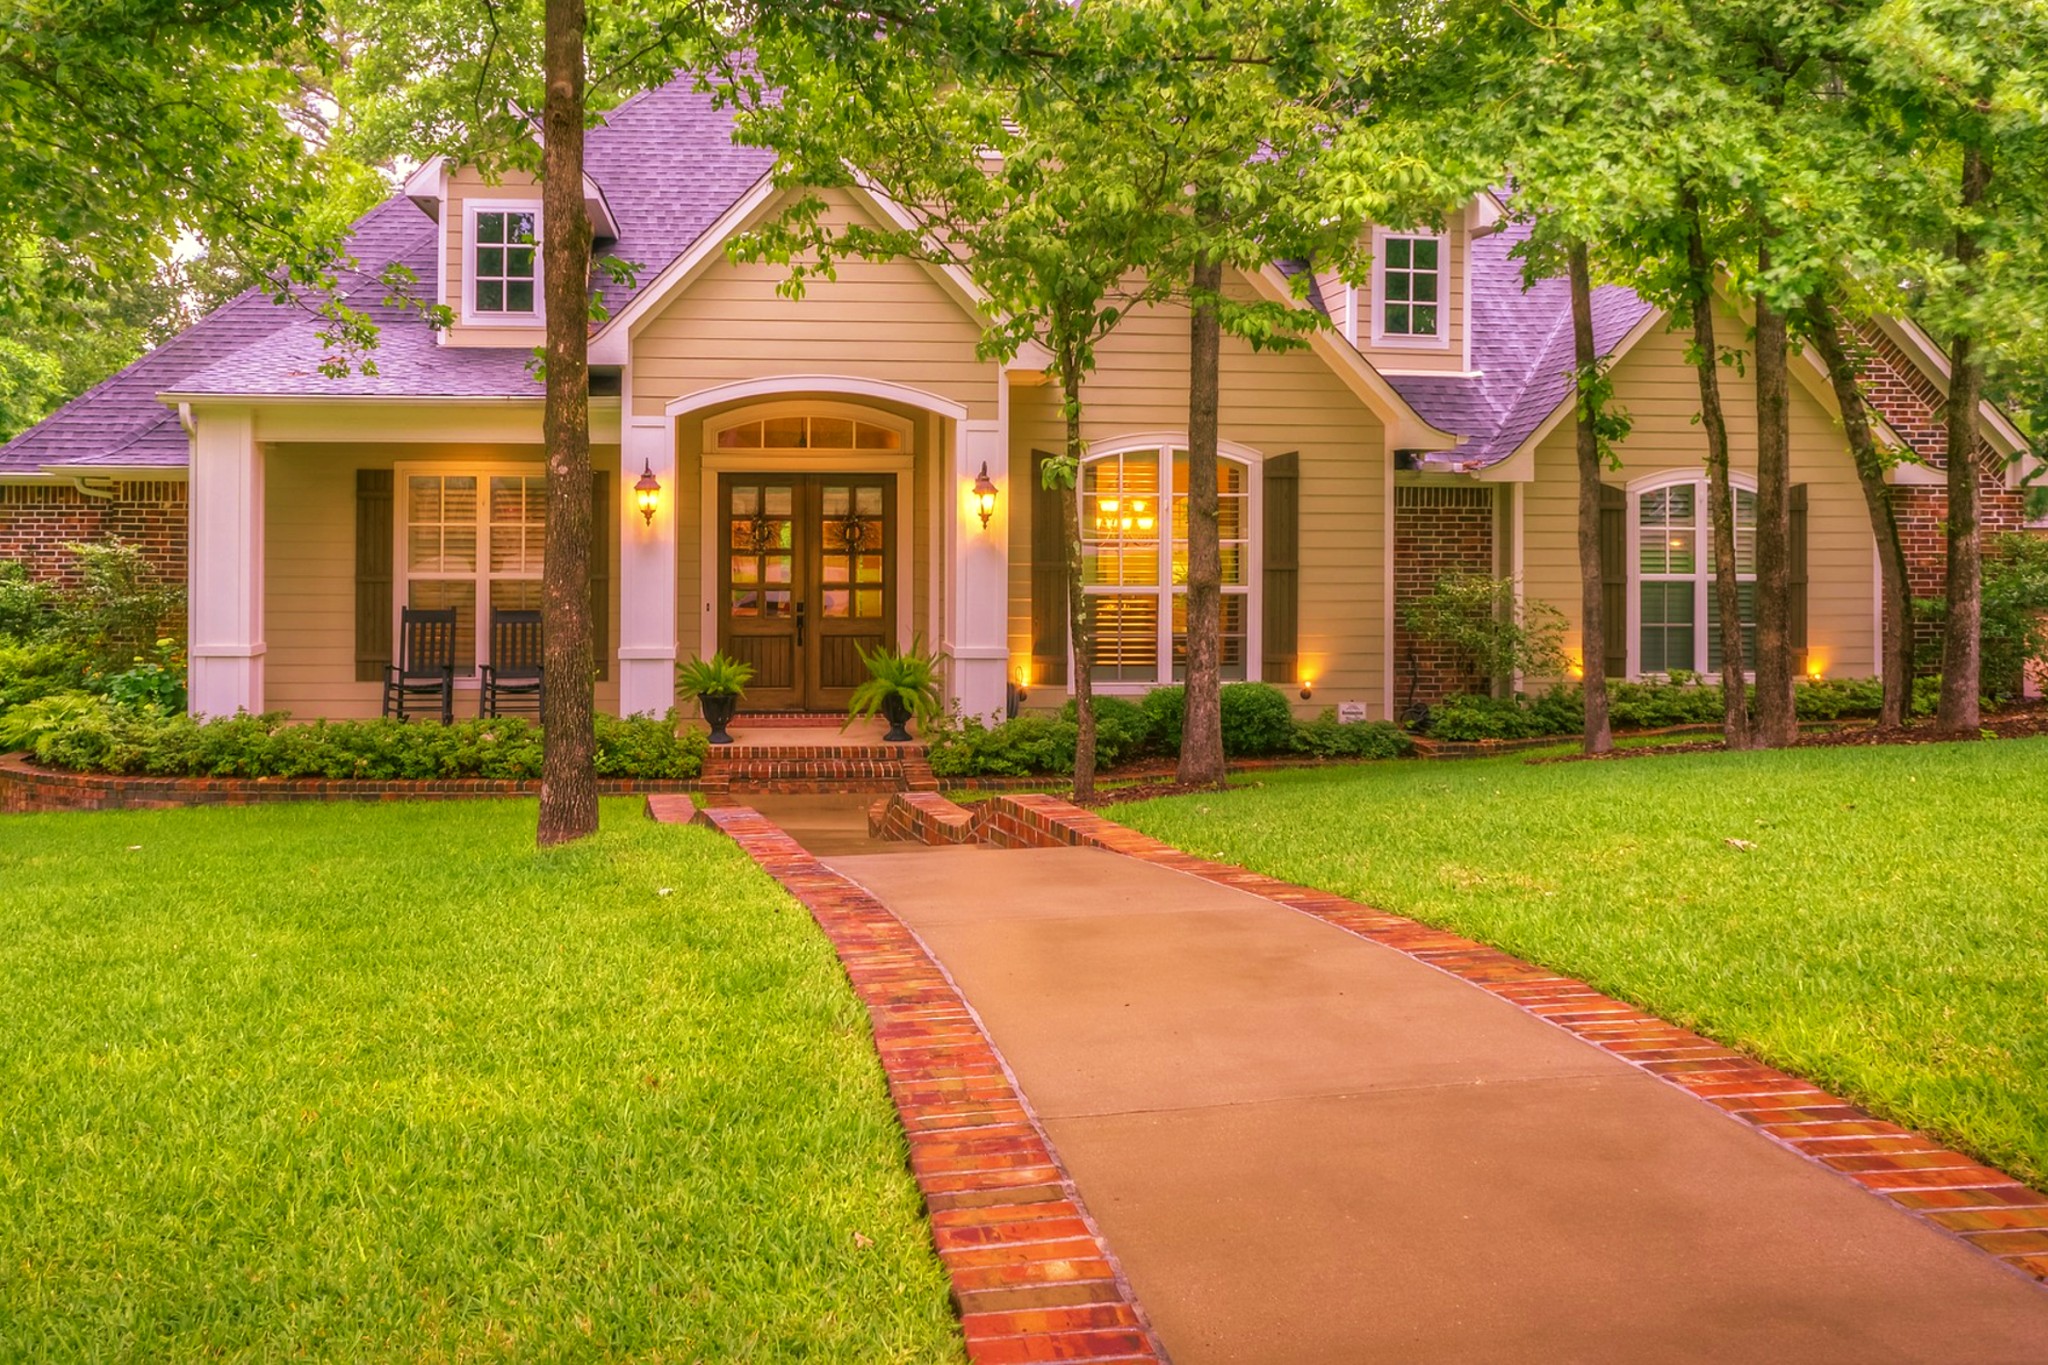 A beautiful home with curb appeal ideas is a good investment.